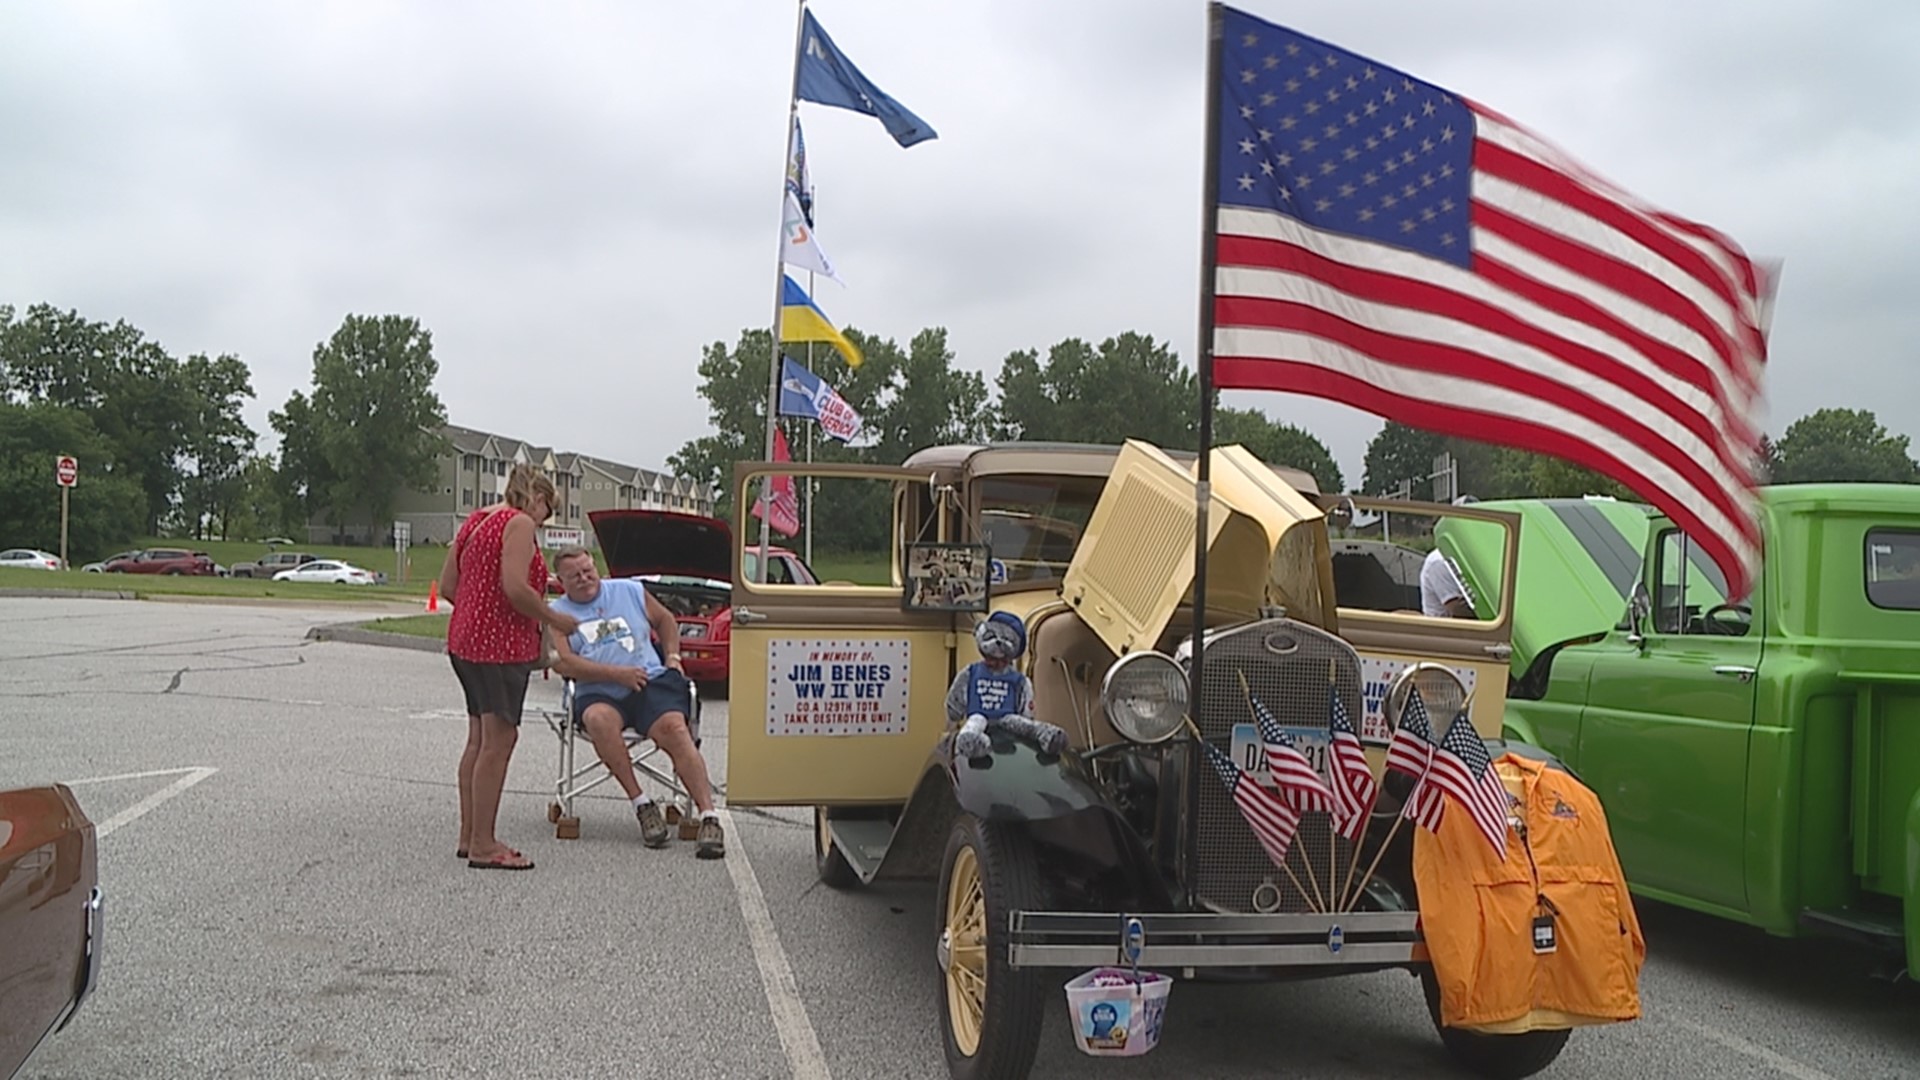 The car show held on Saturday, July 16, was a fundraiser for the Quad Cities Veterans Outreach Center.